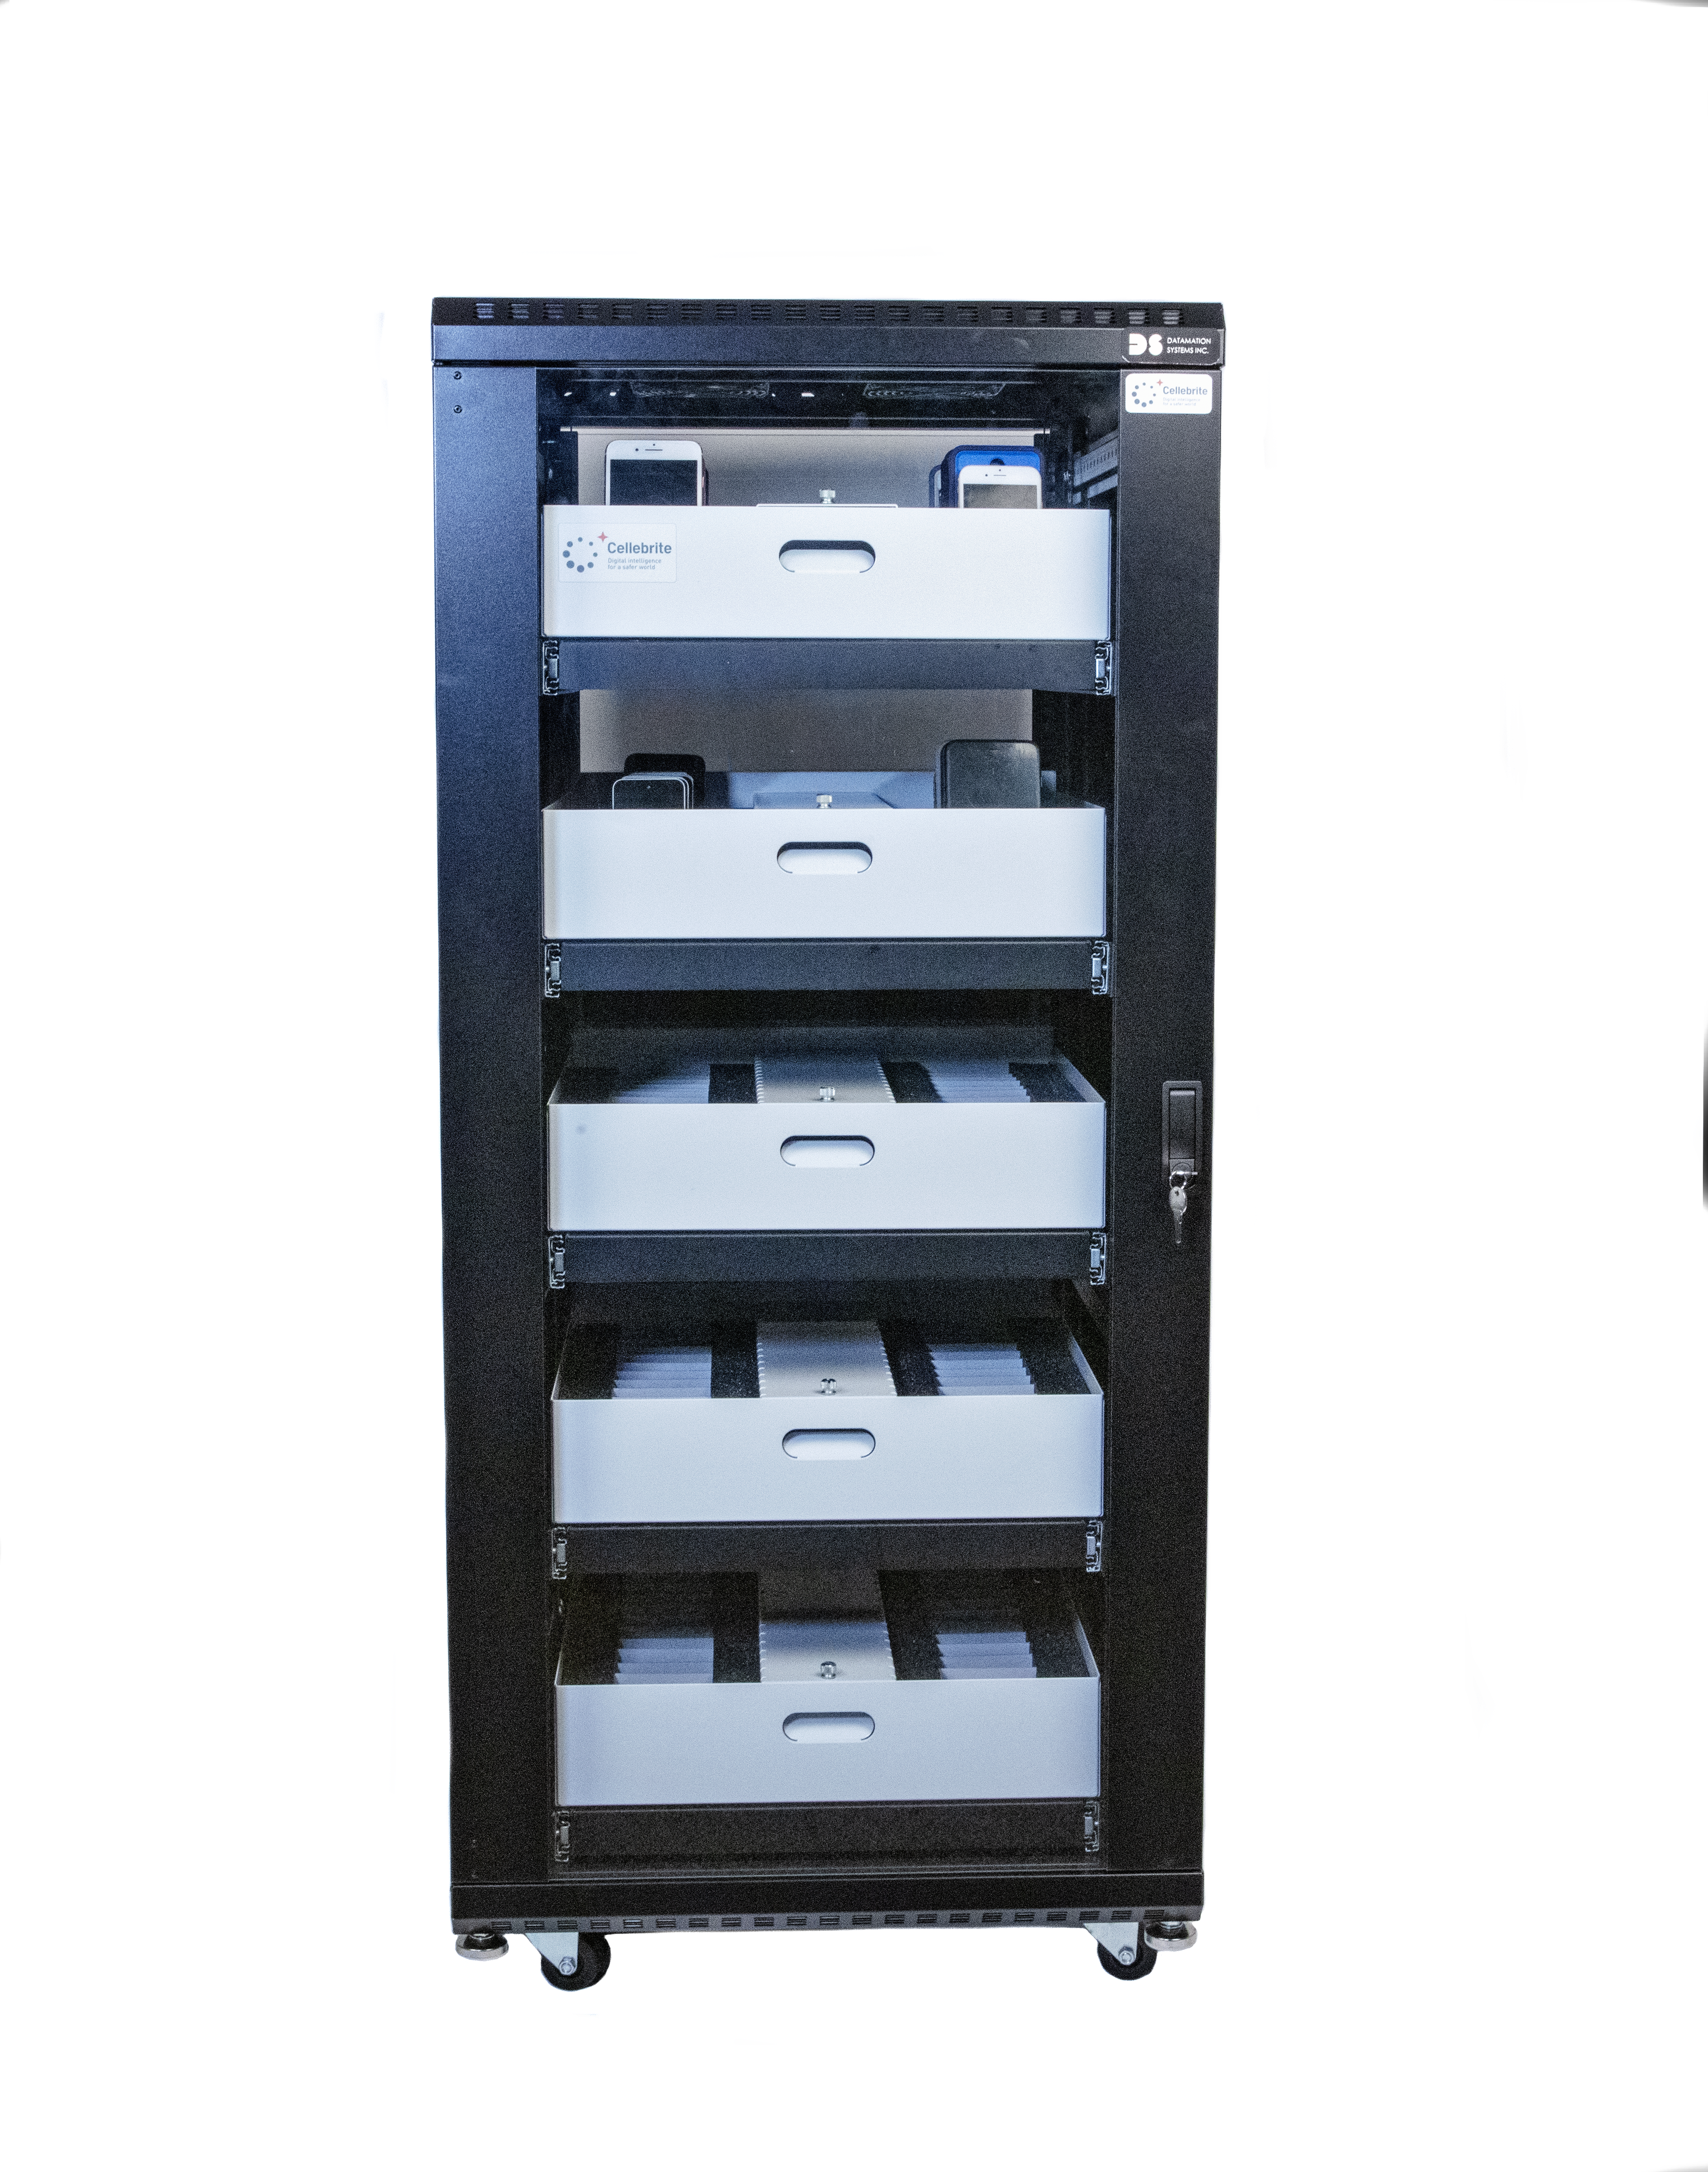 Rack 5 tray closed cellebrite